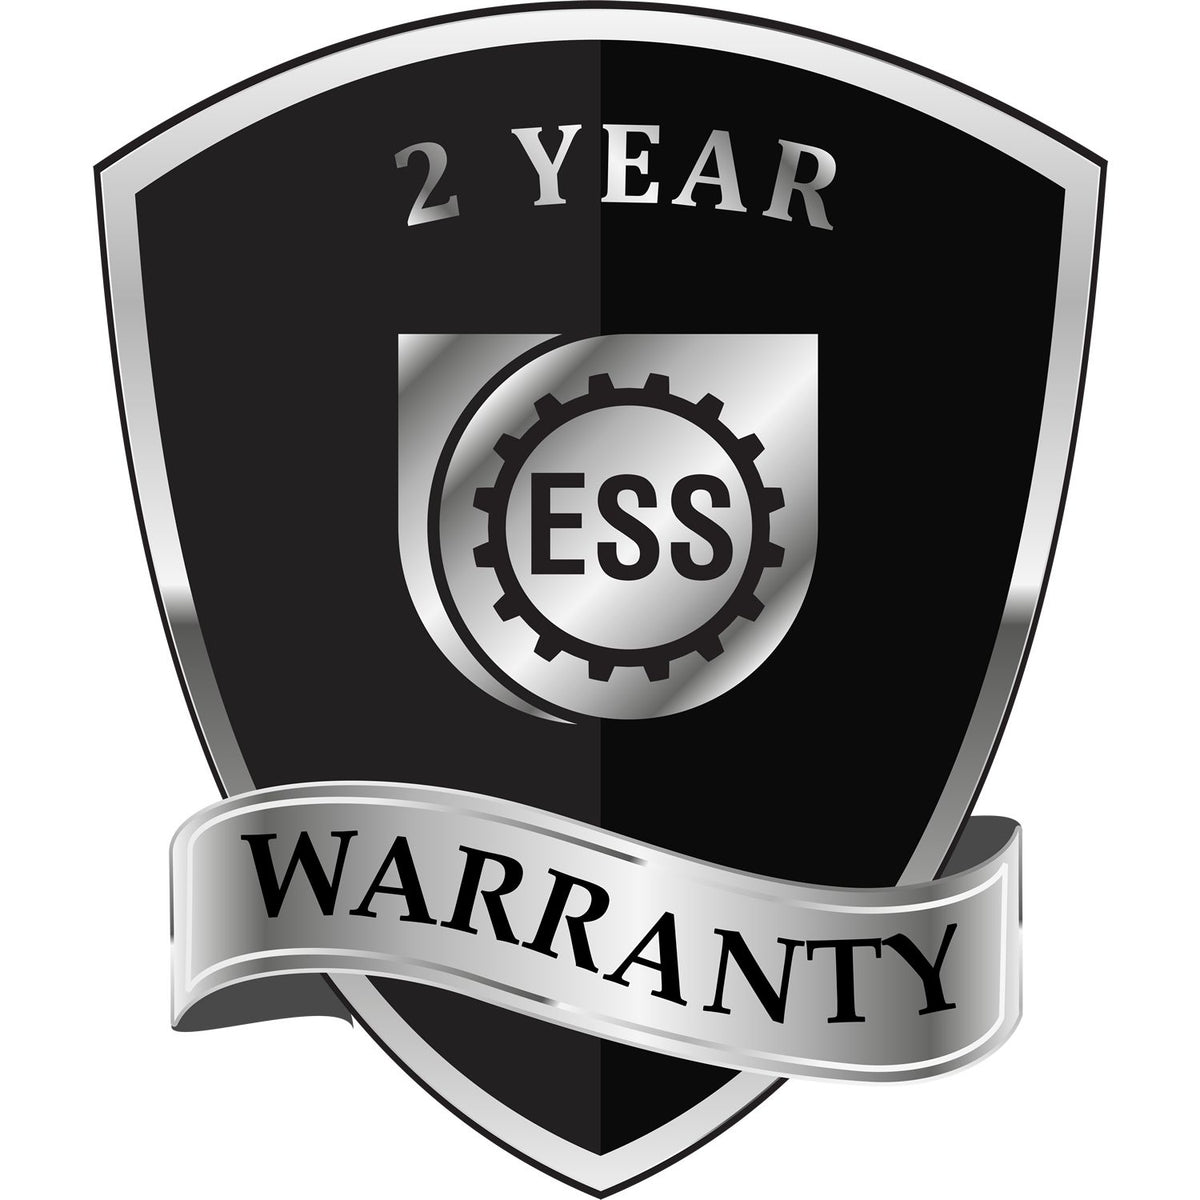 A black and silver badge or emblem showing warranty information for the Handheld Georgia Professional Geologist Embosser